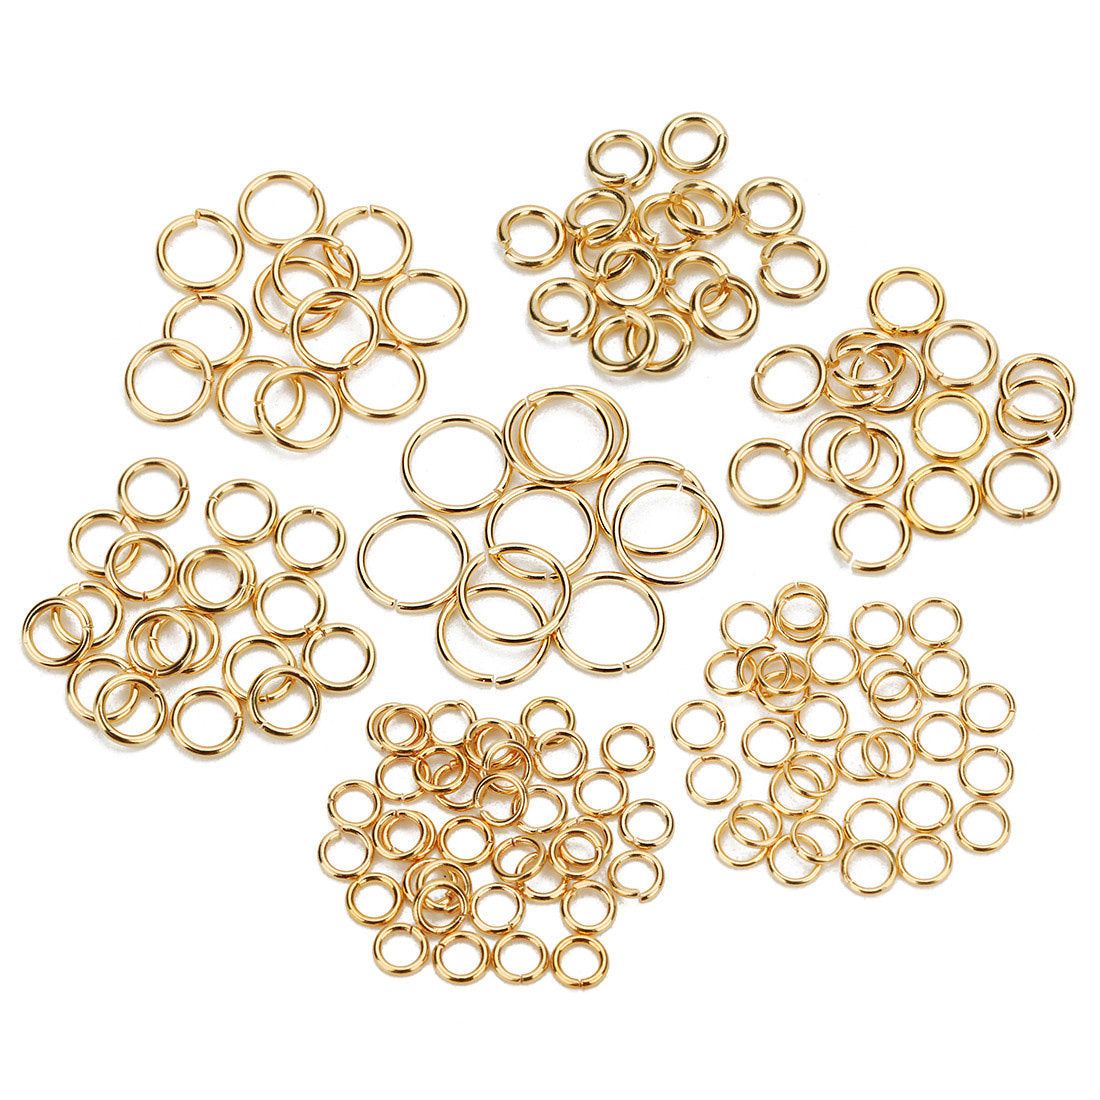 Crafto Golden Kit of Head pins, Eyepins, Jump Rings, Ear Hooks For  Jewellery Making Clasps (Pack of 100) Each - Golden Kit of Head pins,  Eyepins, Jump Rings, Ear Hooks For Jewellery